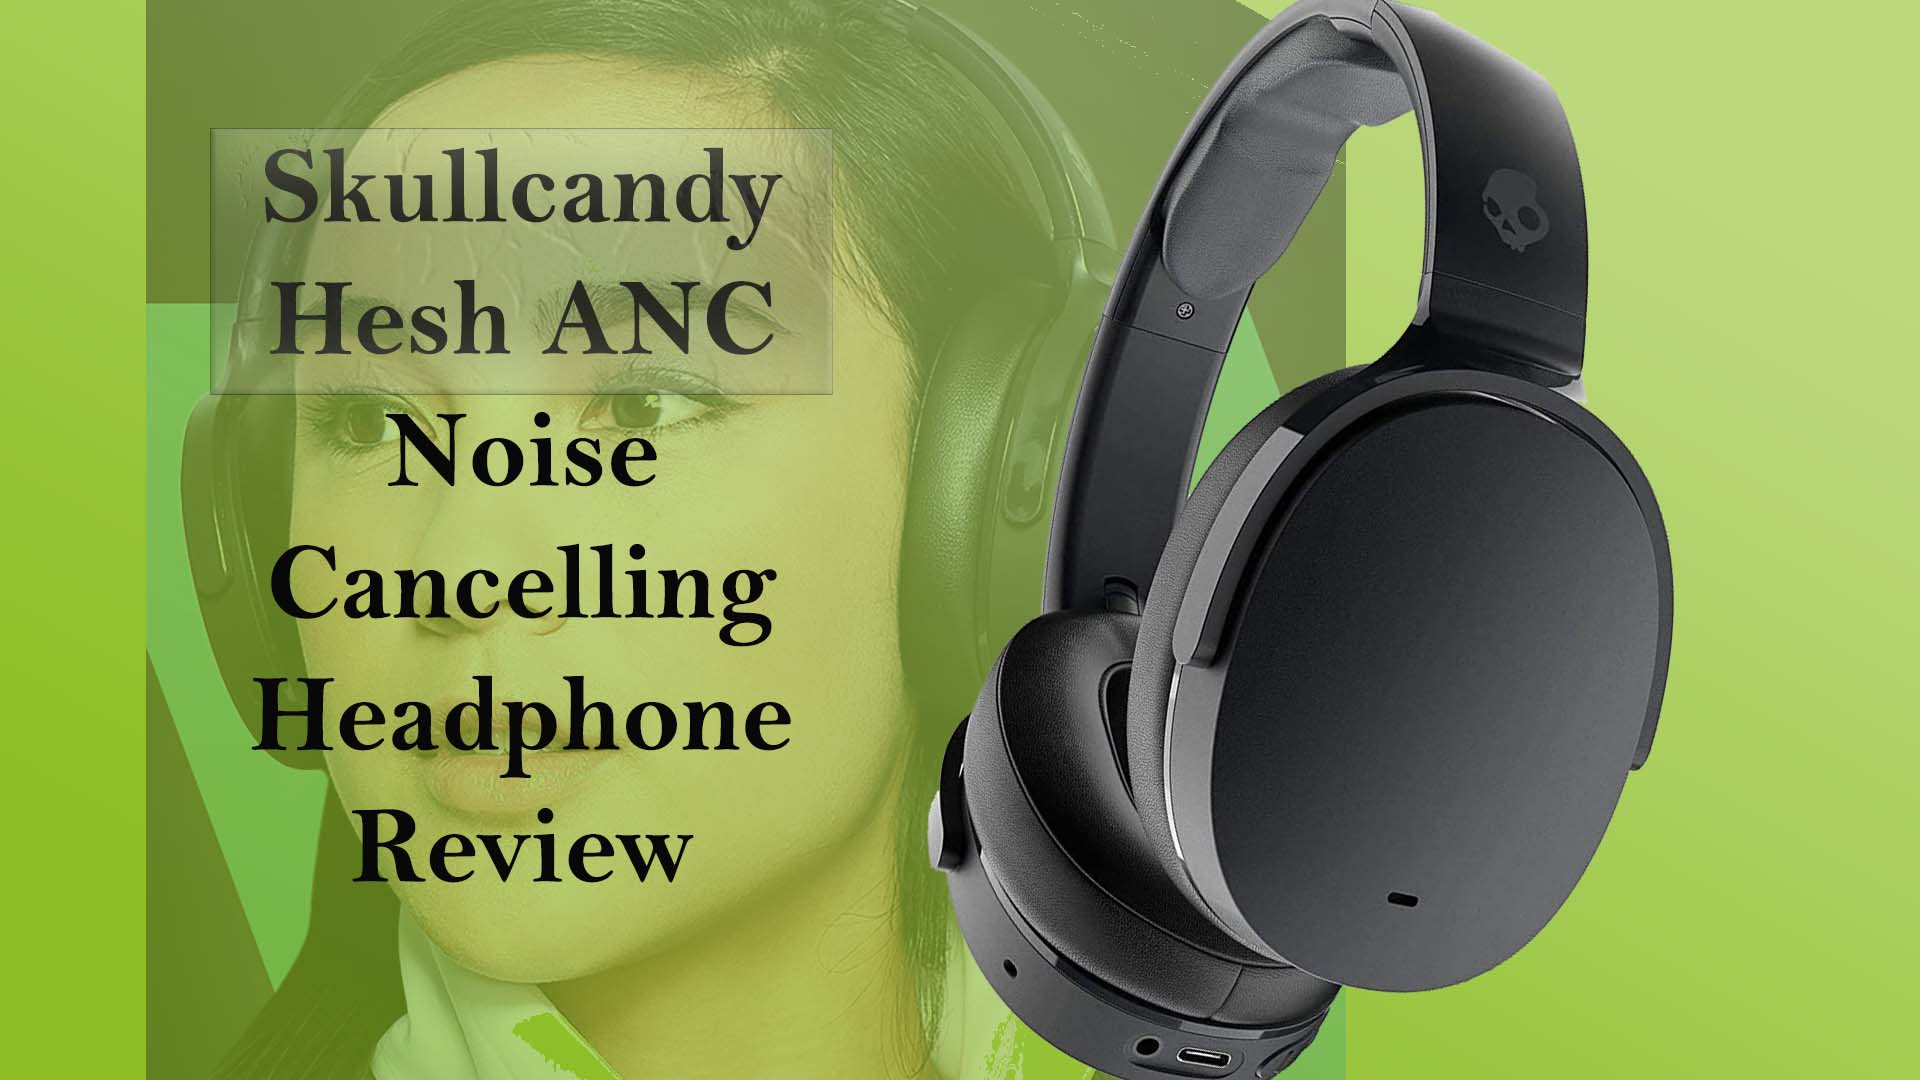 Skullcandy Hesh ANC Wireless Noise Cancelling Headphones | Review, Specs, & more